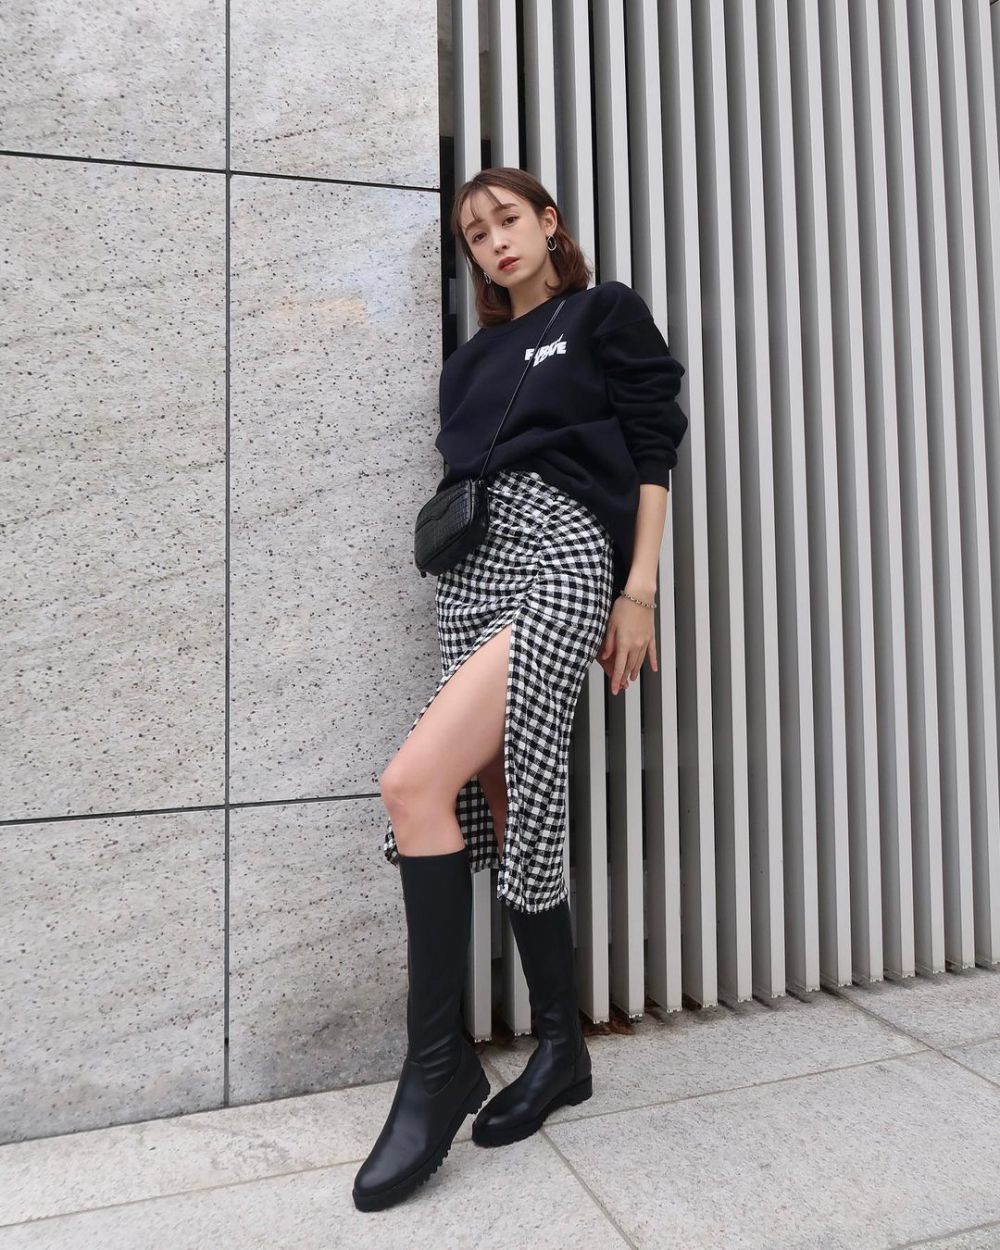 7 Ide Mix and Match Outfit ala Model Sachi Fujii, Gorgeous!